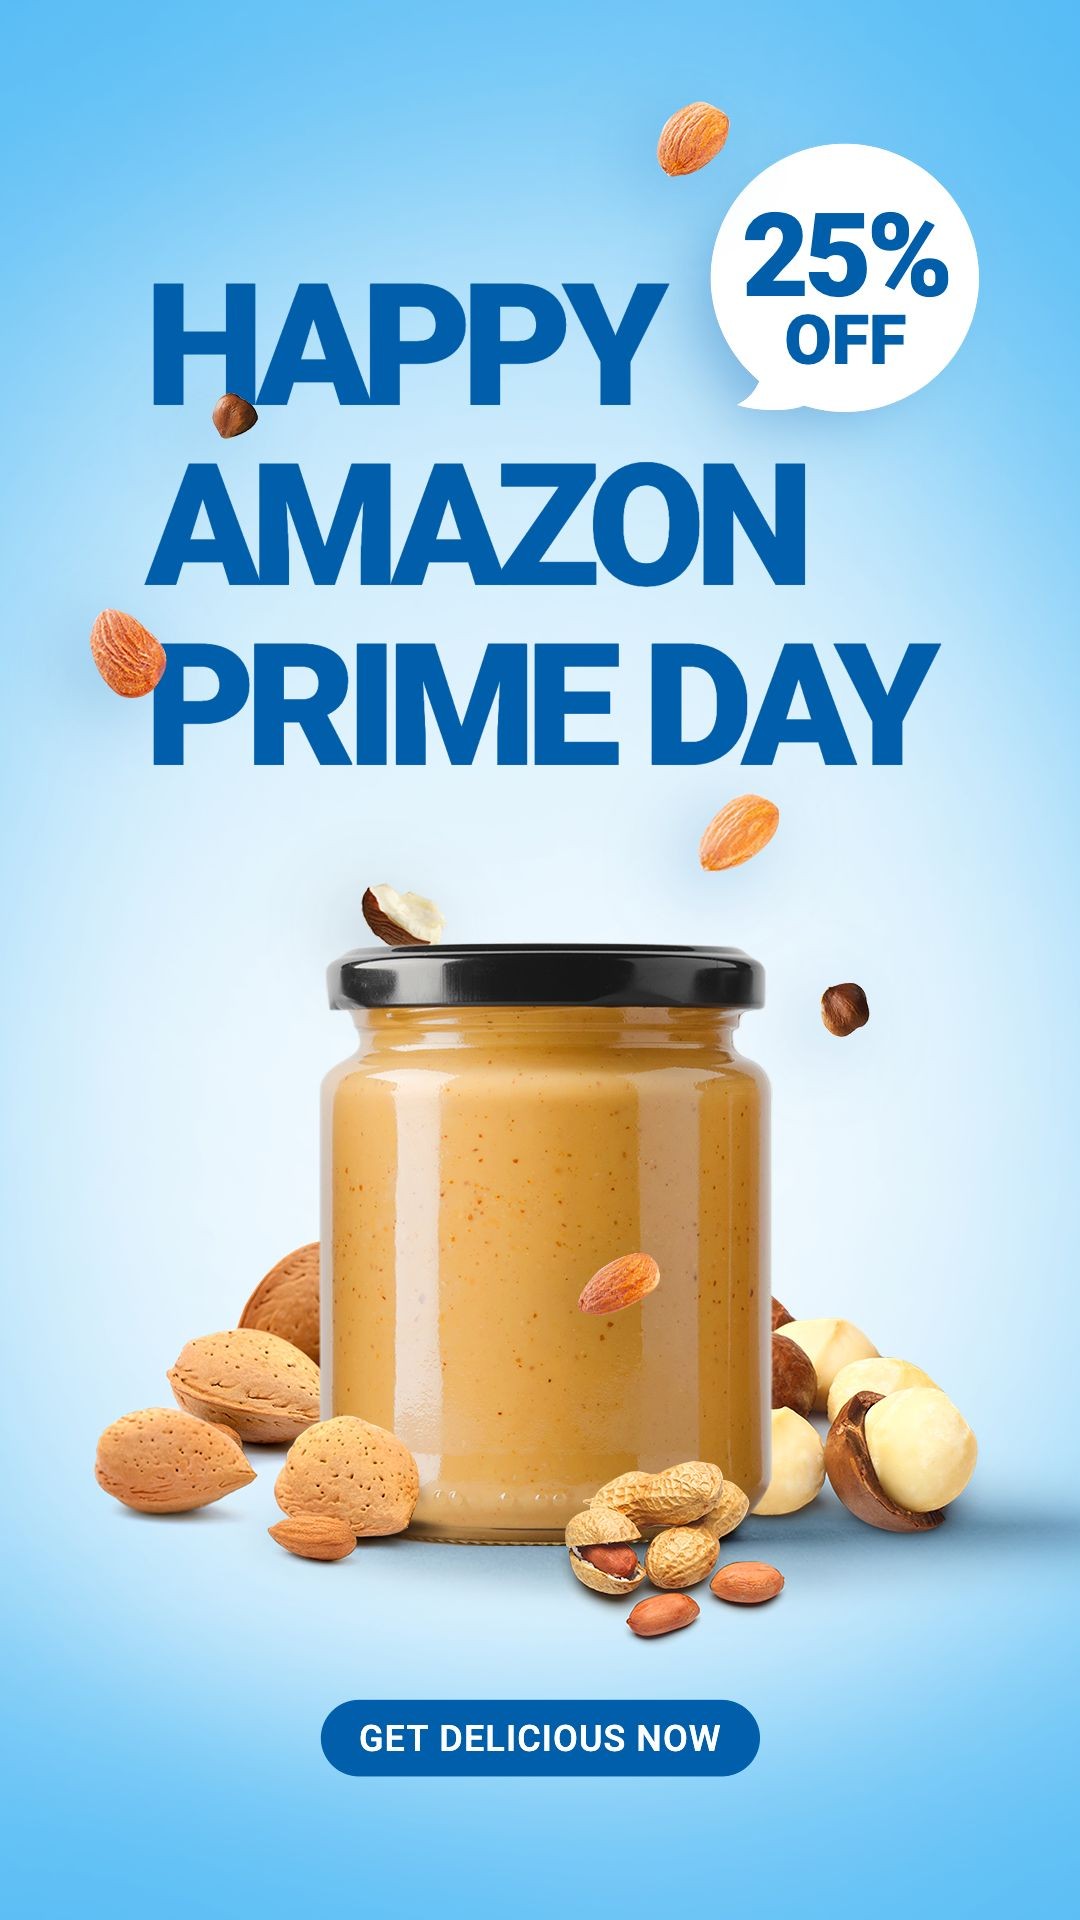 Amazon Prime Day Peanut Butter Discount Sale Promotion Ecommerce Story